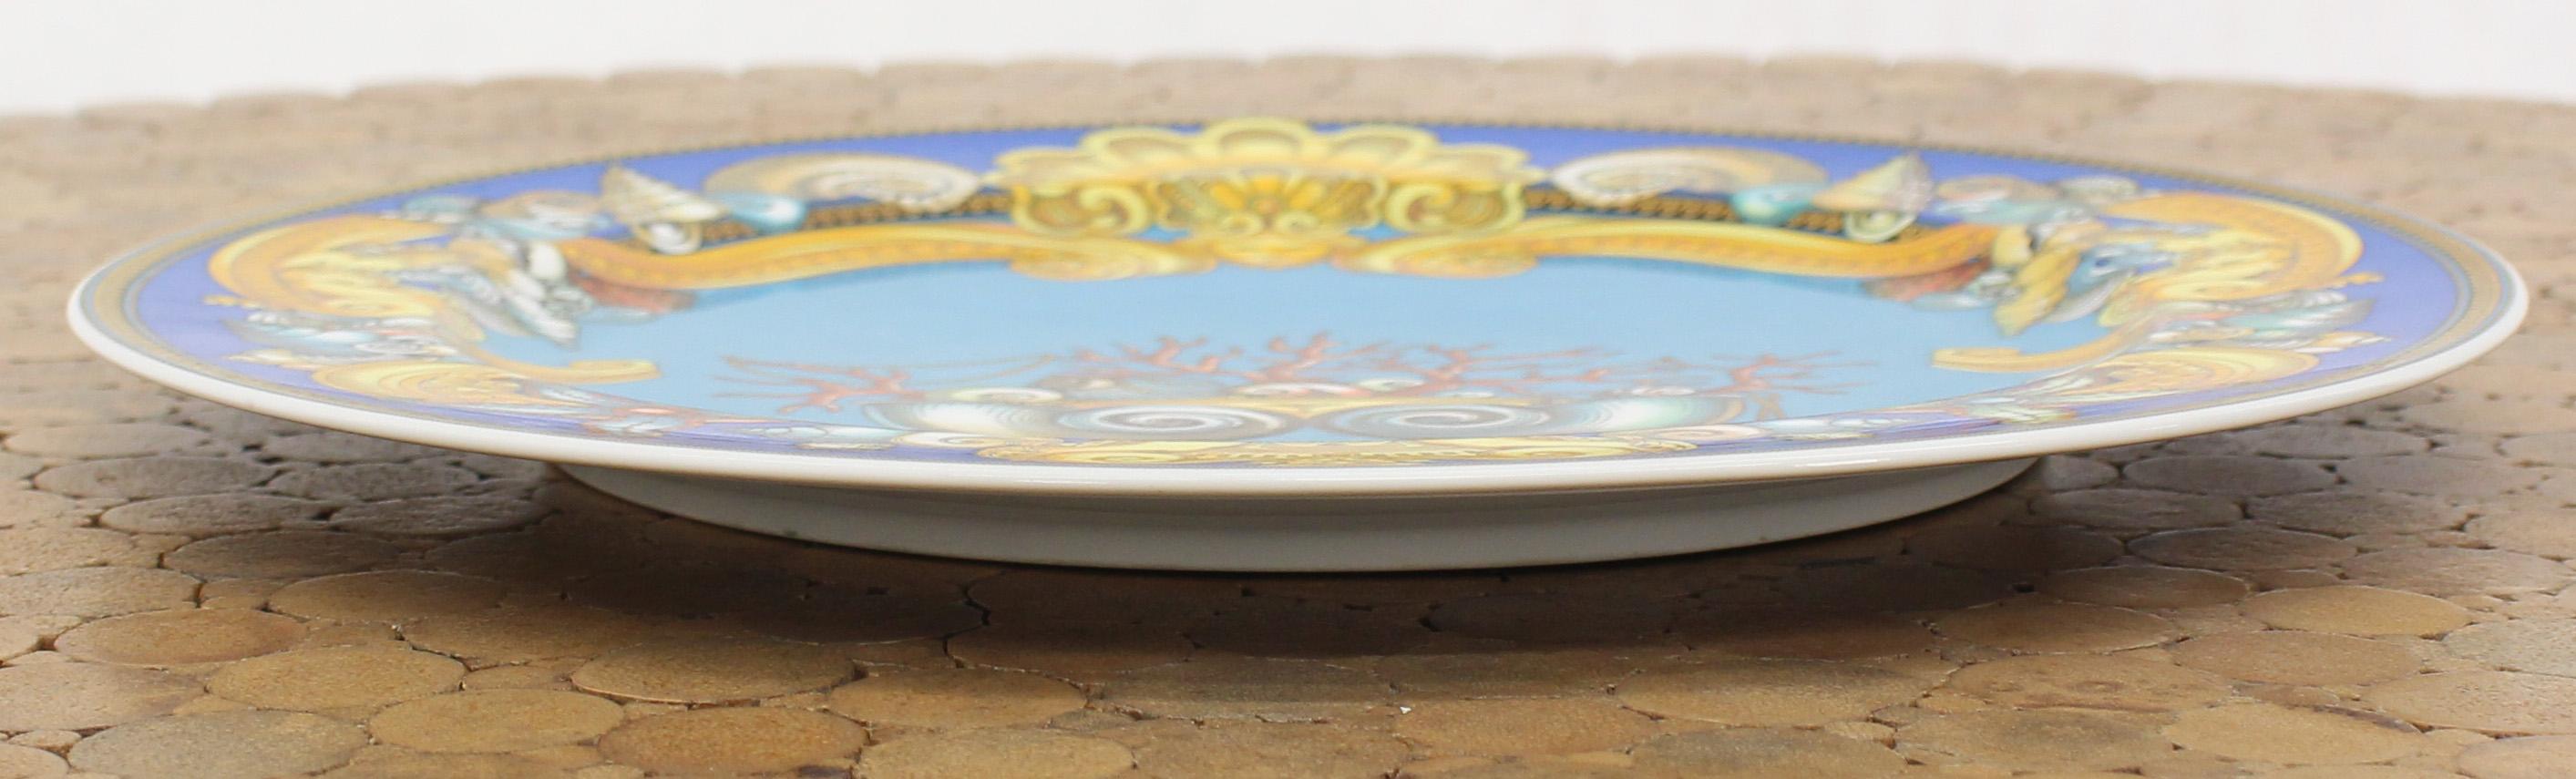 Italian Rosenthal Versace Porcelain Charger Plate